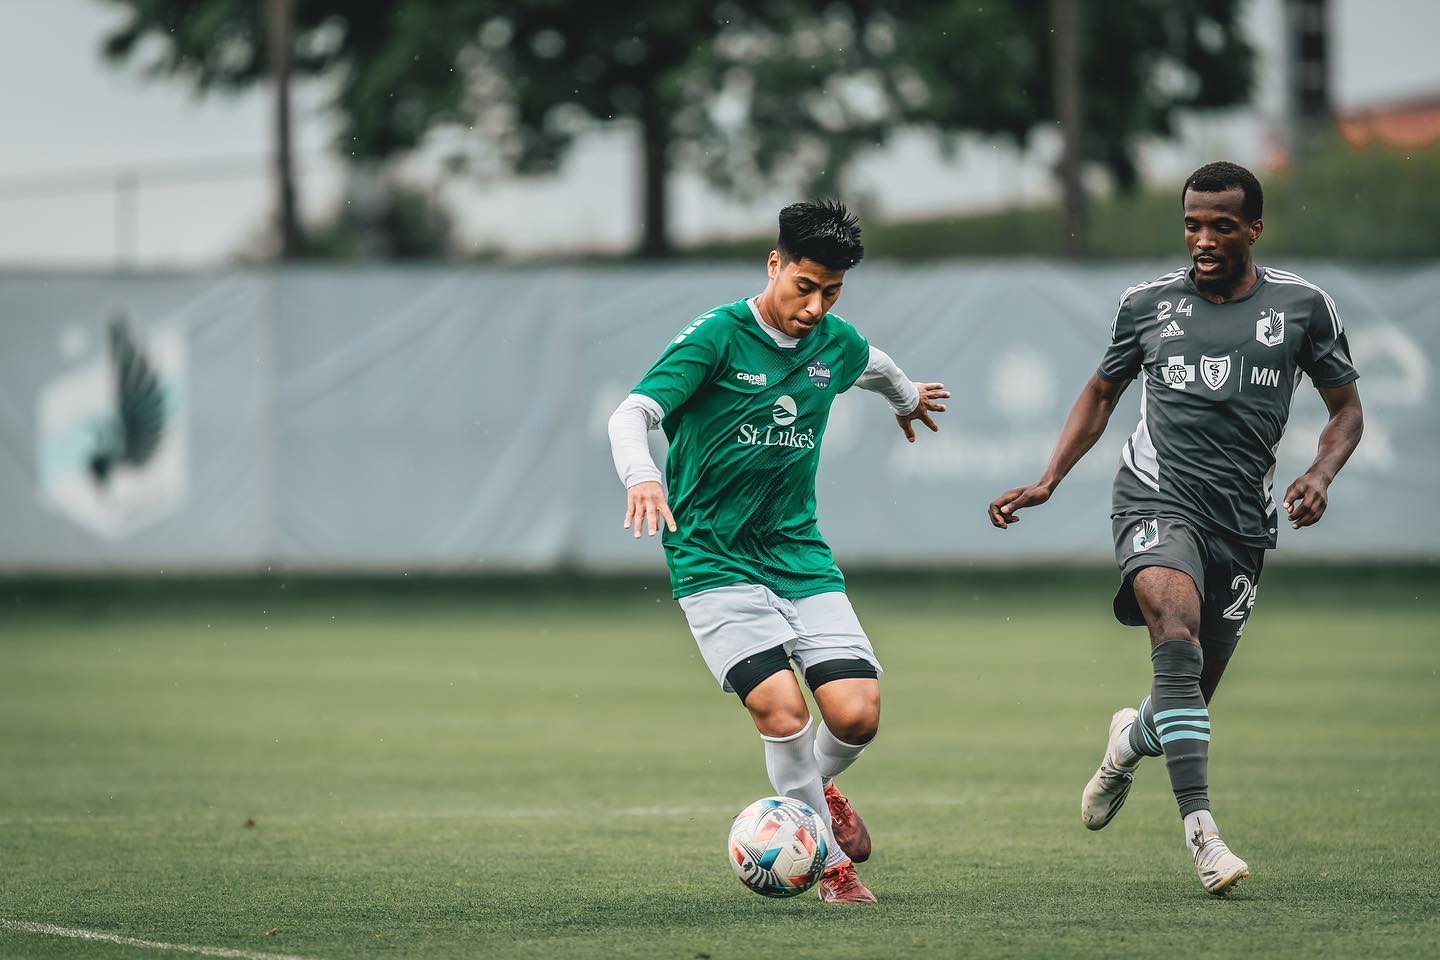 BlueGreens Face MNUFC2 in a Historic Friendly Full of Goals